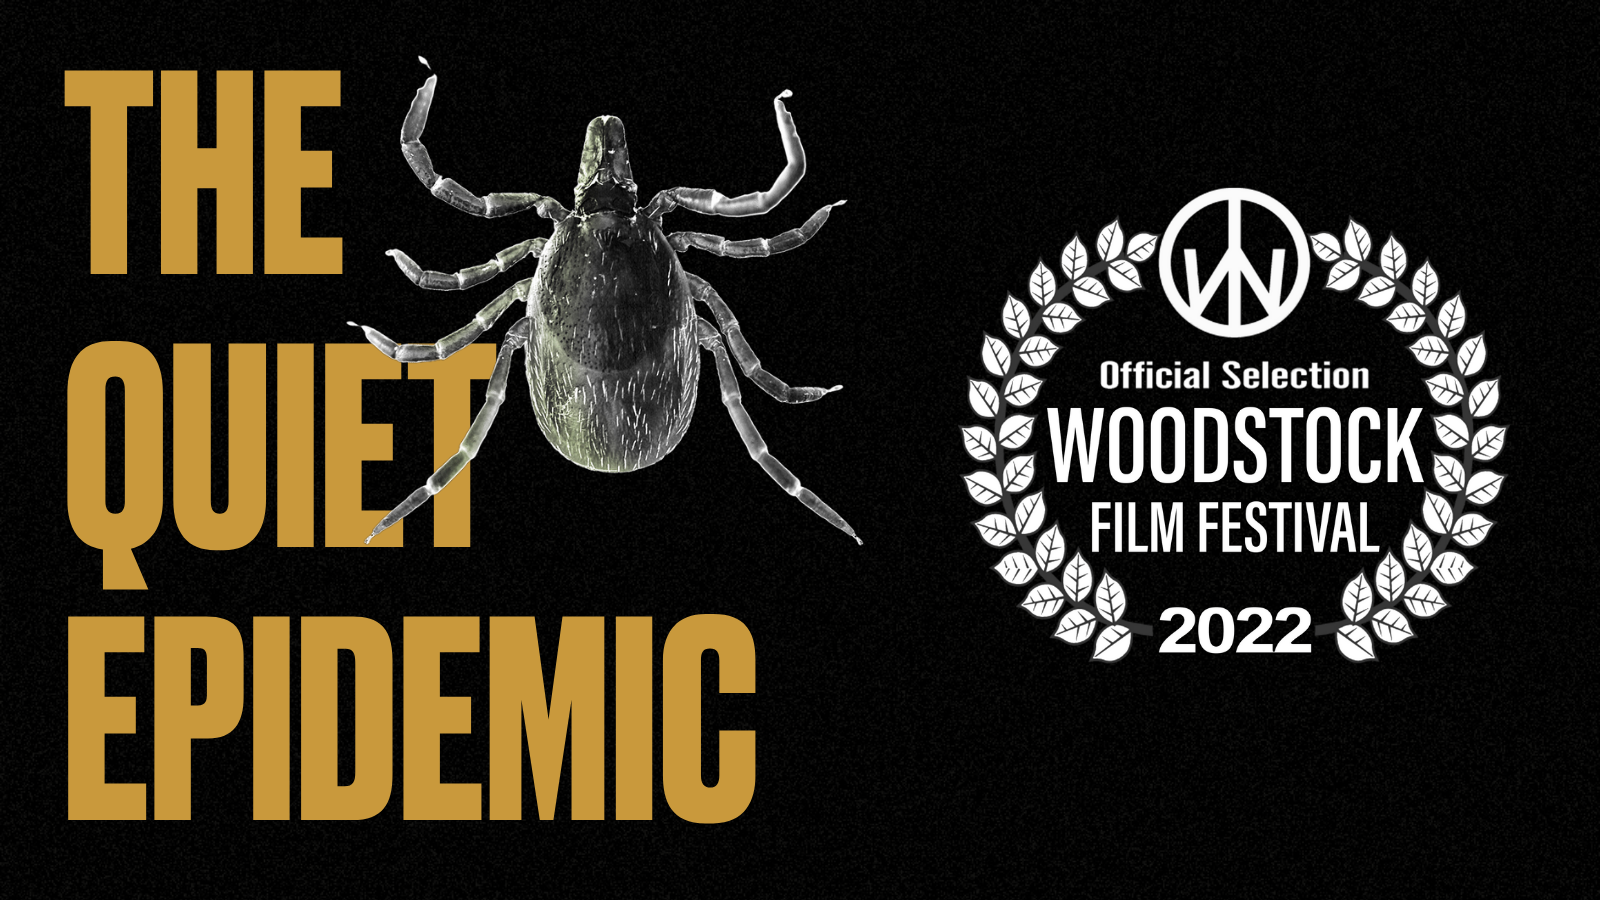 "The Quiet Epidemic" Documentary Officially Selected to Screen at the Prestigious Woodstock Film Festival